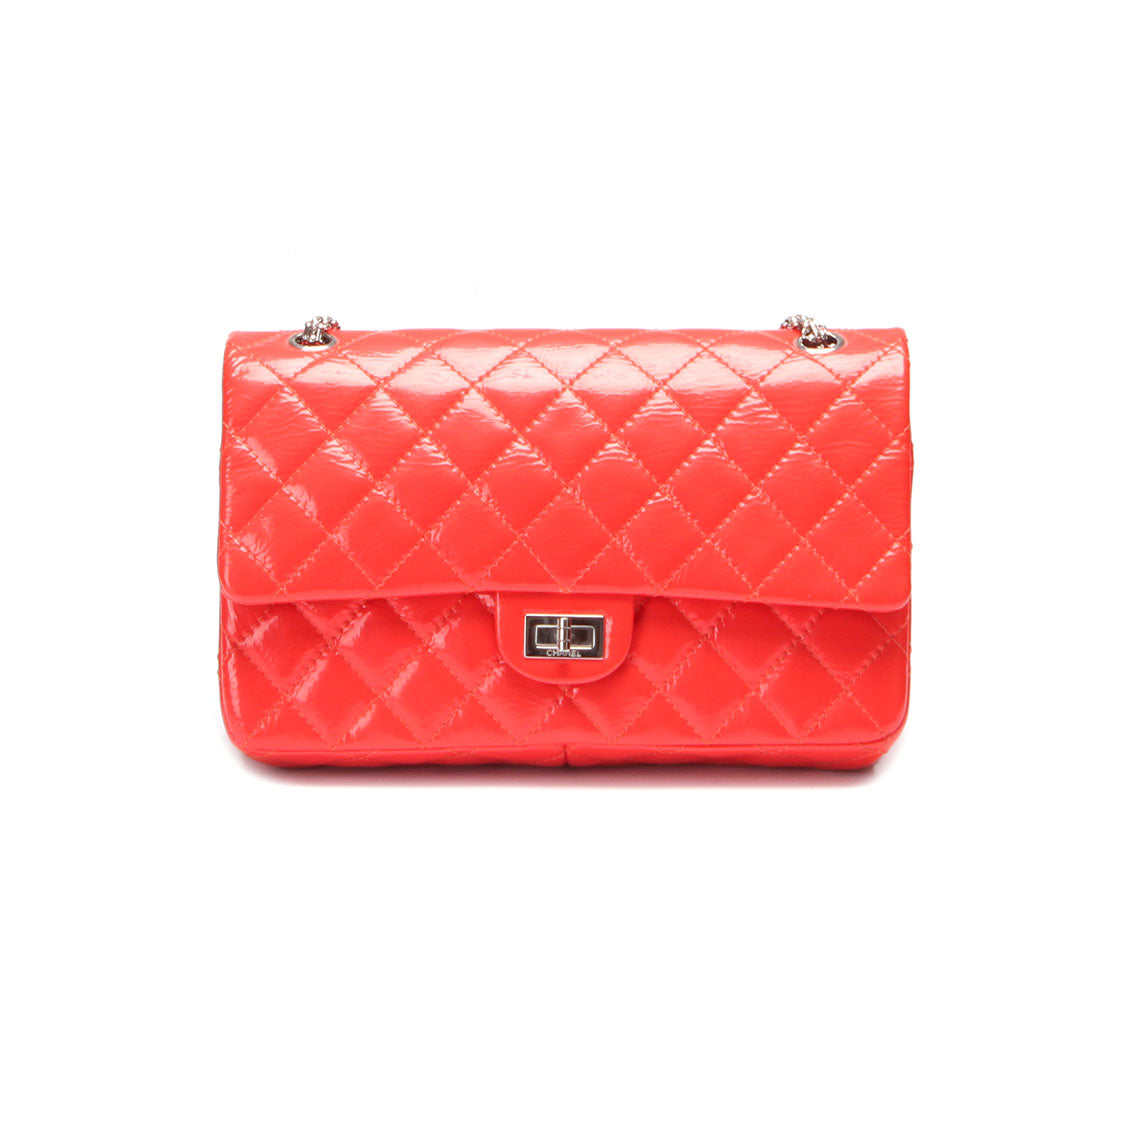 Quilted Patent Leather 2.55 Chain Flap Shoulder Bag